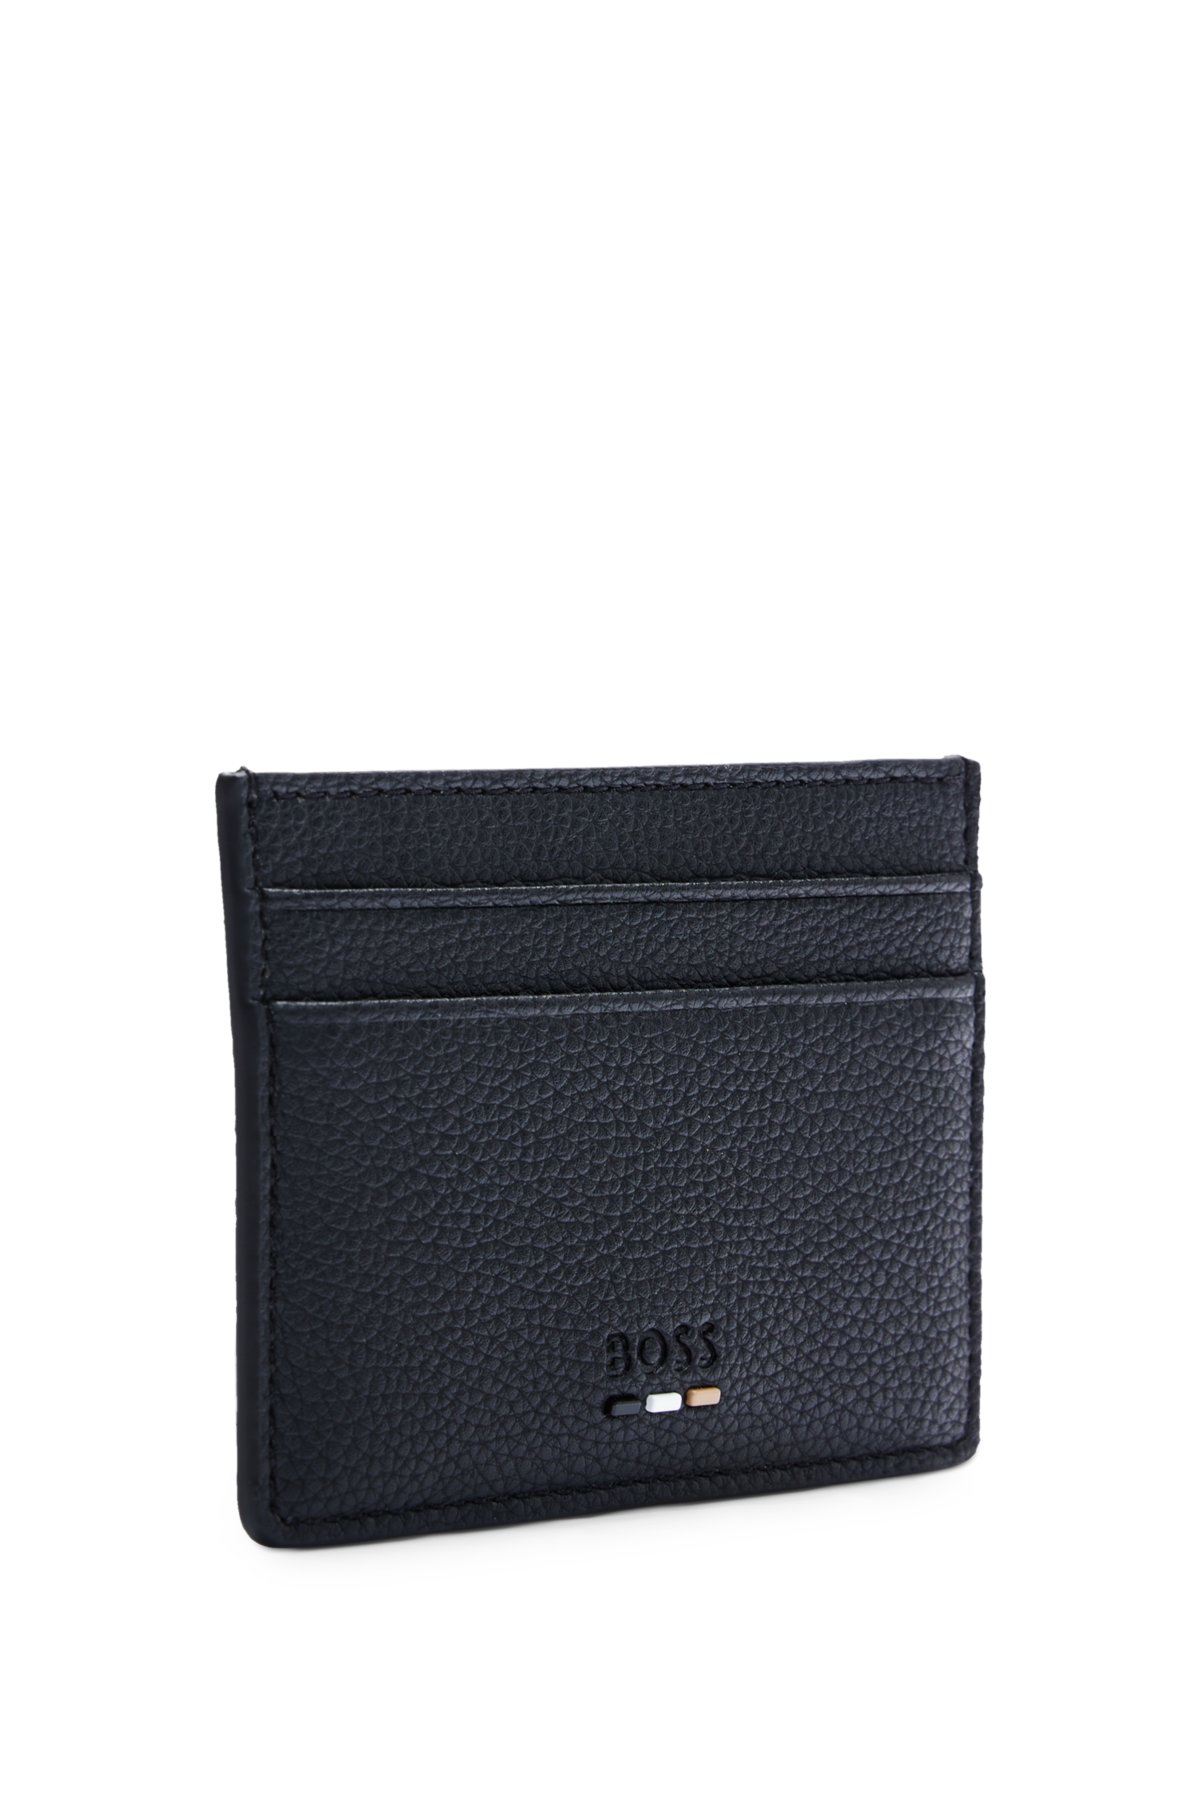 Faux-leather card holder with money clip, Black